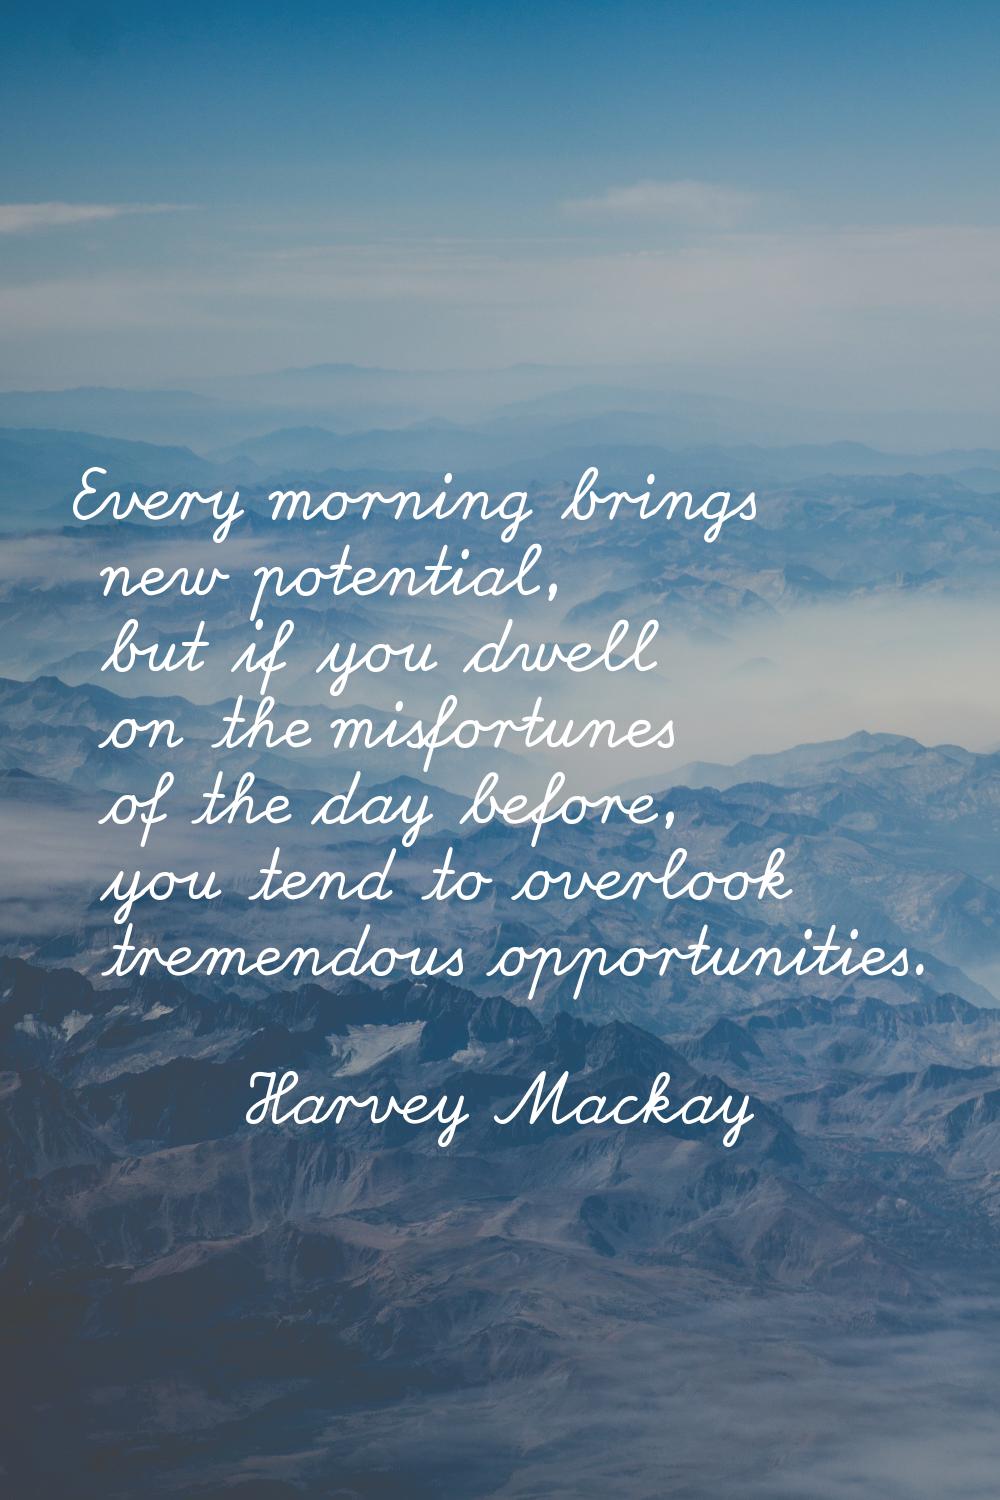 Every morning brings new potential, but if you dwell on the misfortunes of the day before, you tend